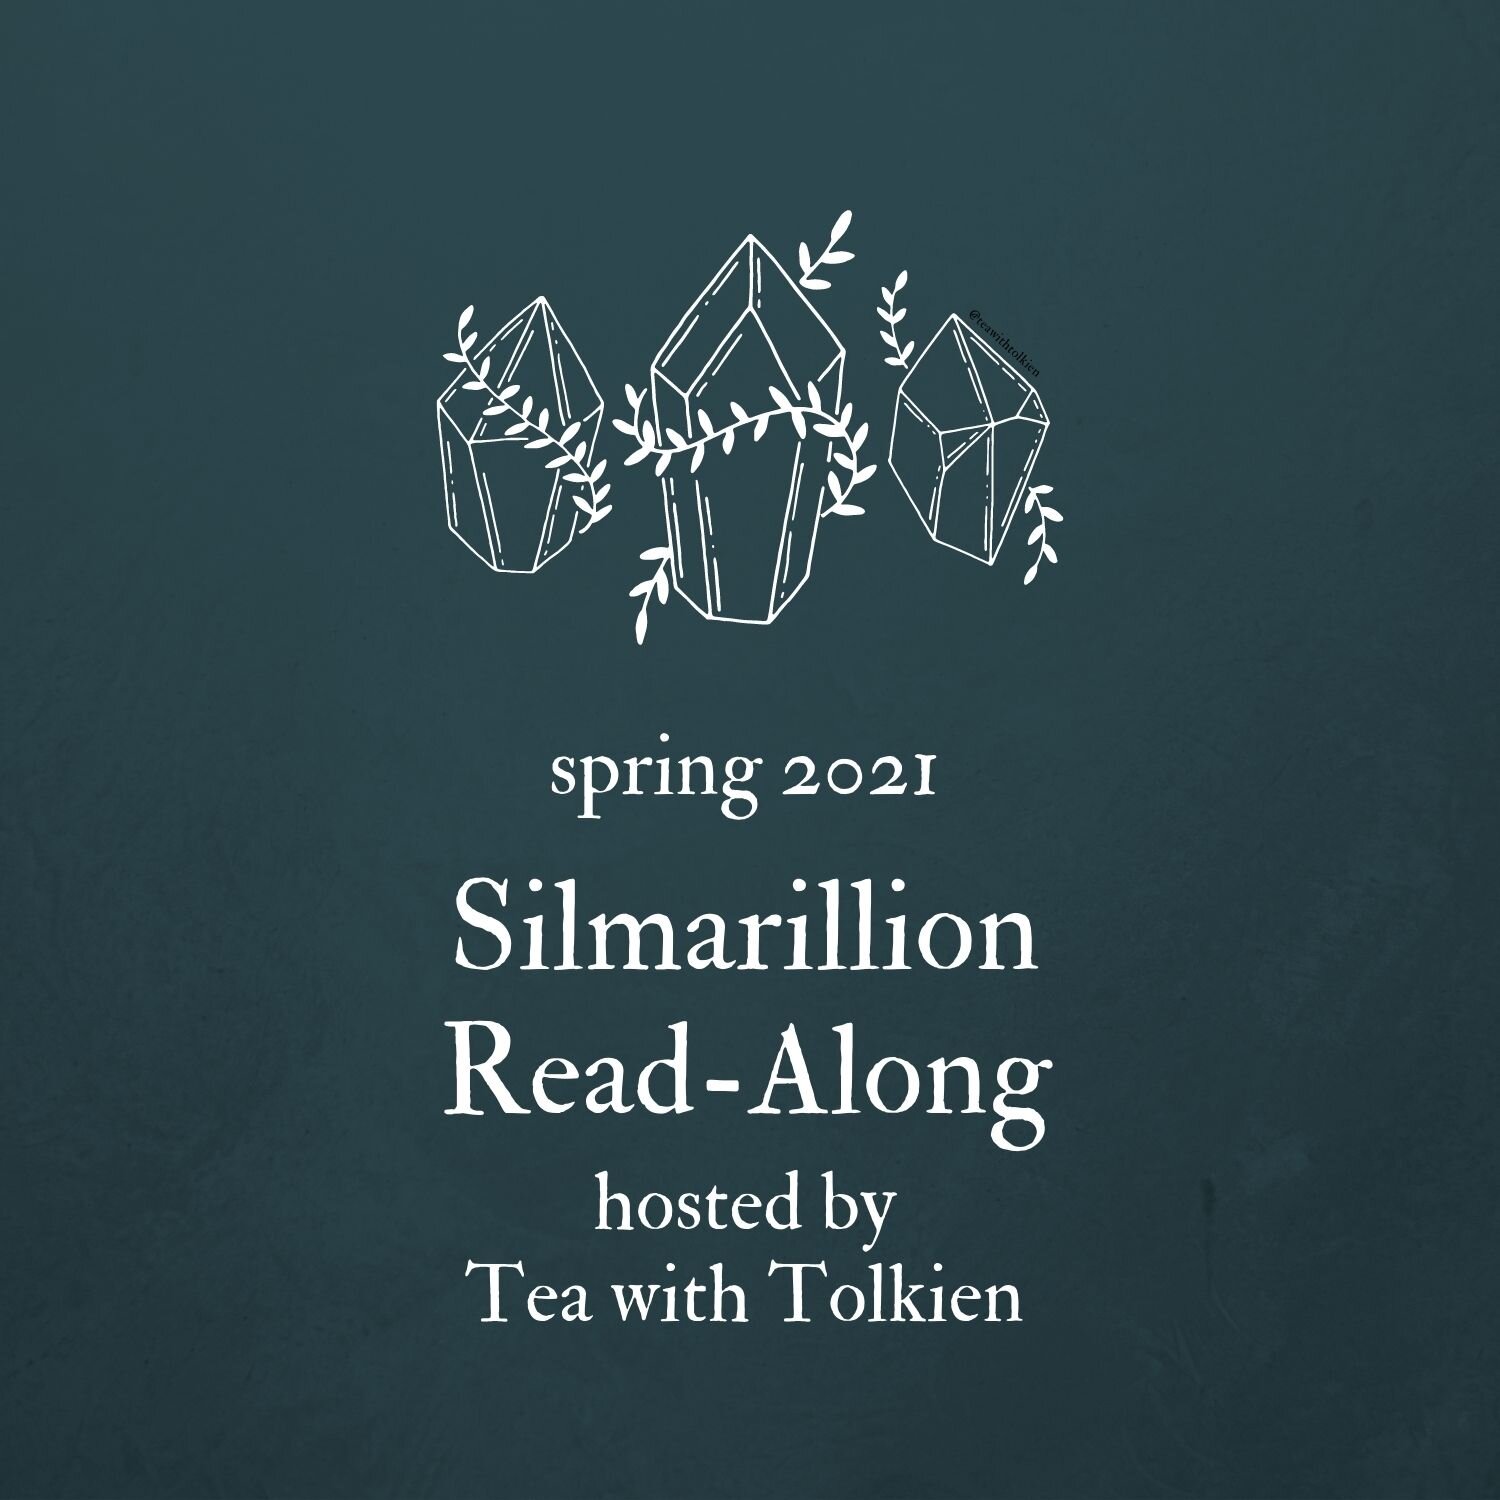 Of the Rings of Power and the Third Age (Silmarillion Study, Part 20)